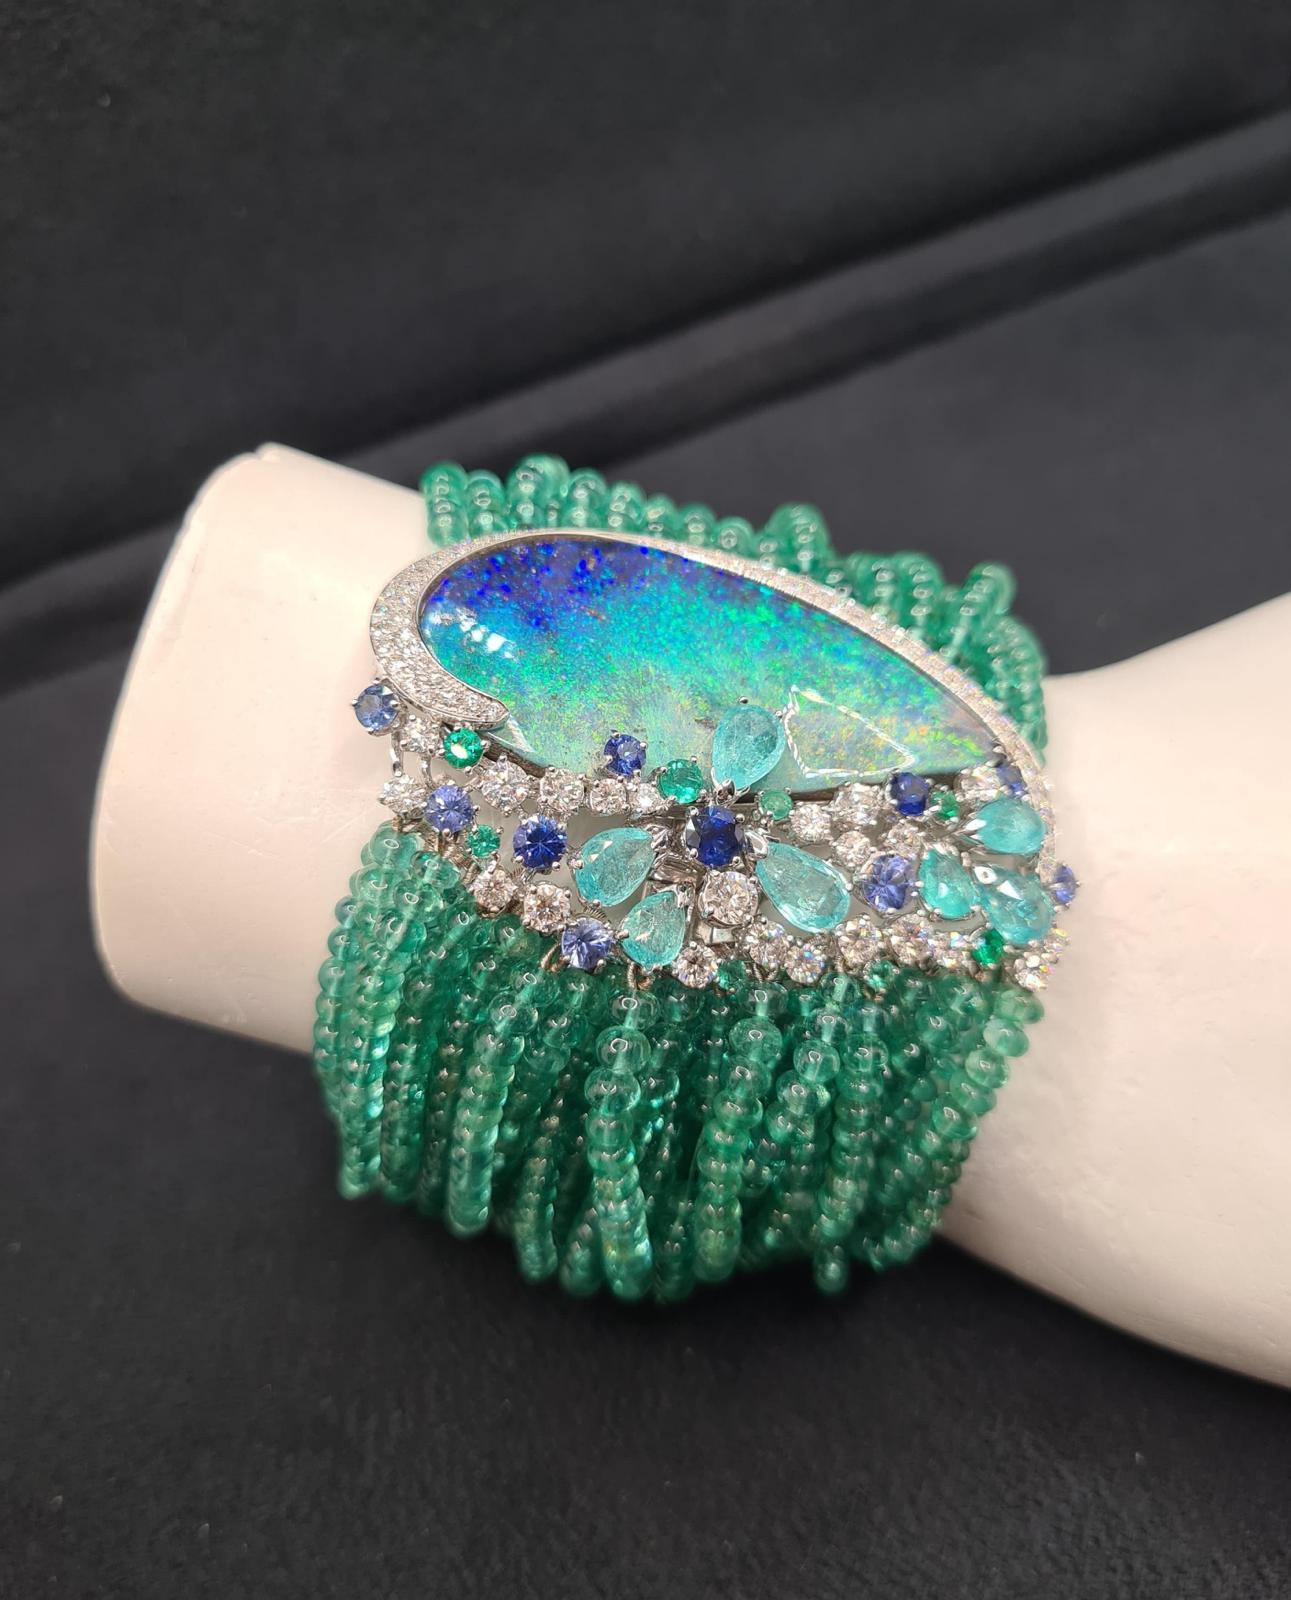 Introducing the magnificent POSEIDON EMERALD BRACELET, a breathtaking fusion of elegance and luxury. Crafted with white gold, this bracelet features a dazzling array of diamonds pave, emerald beads threads, and a flat polished drop-shaped iridescent